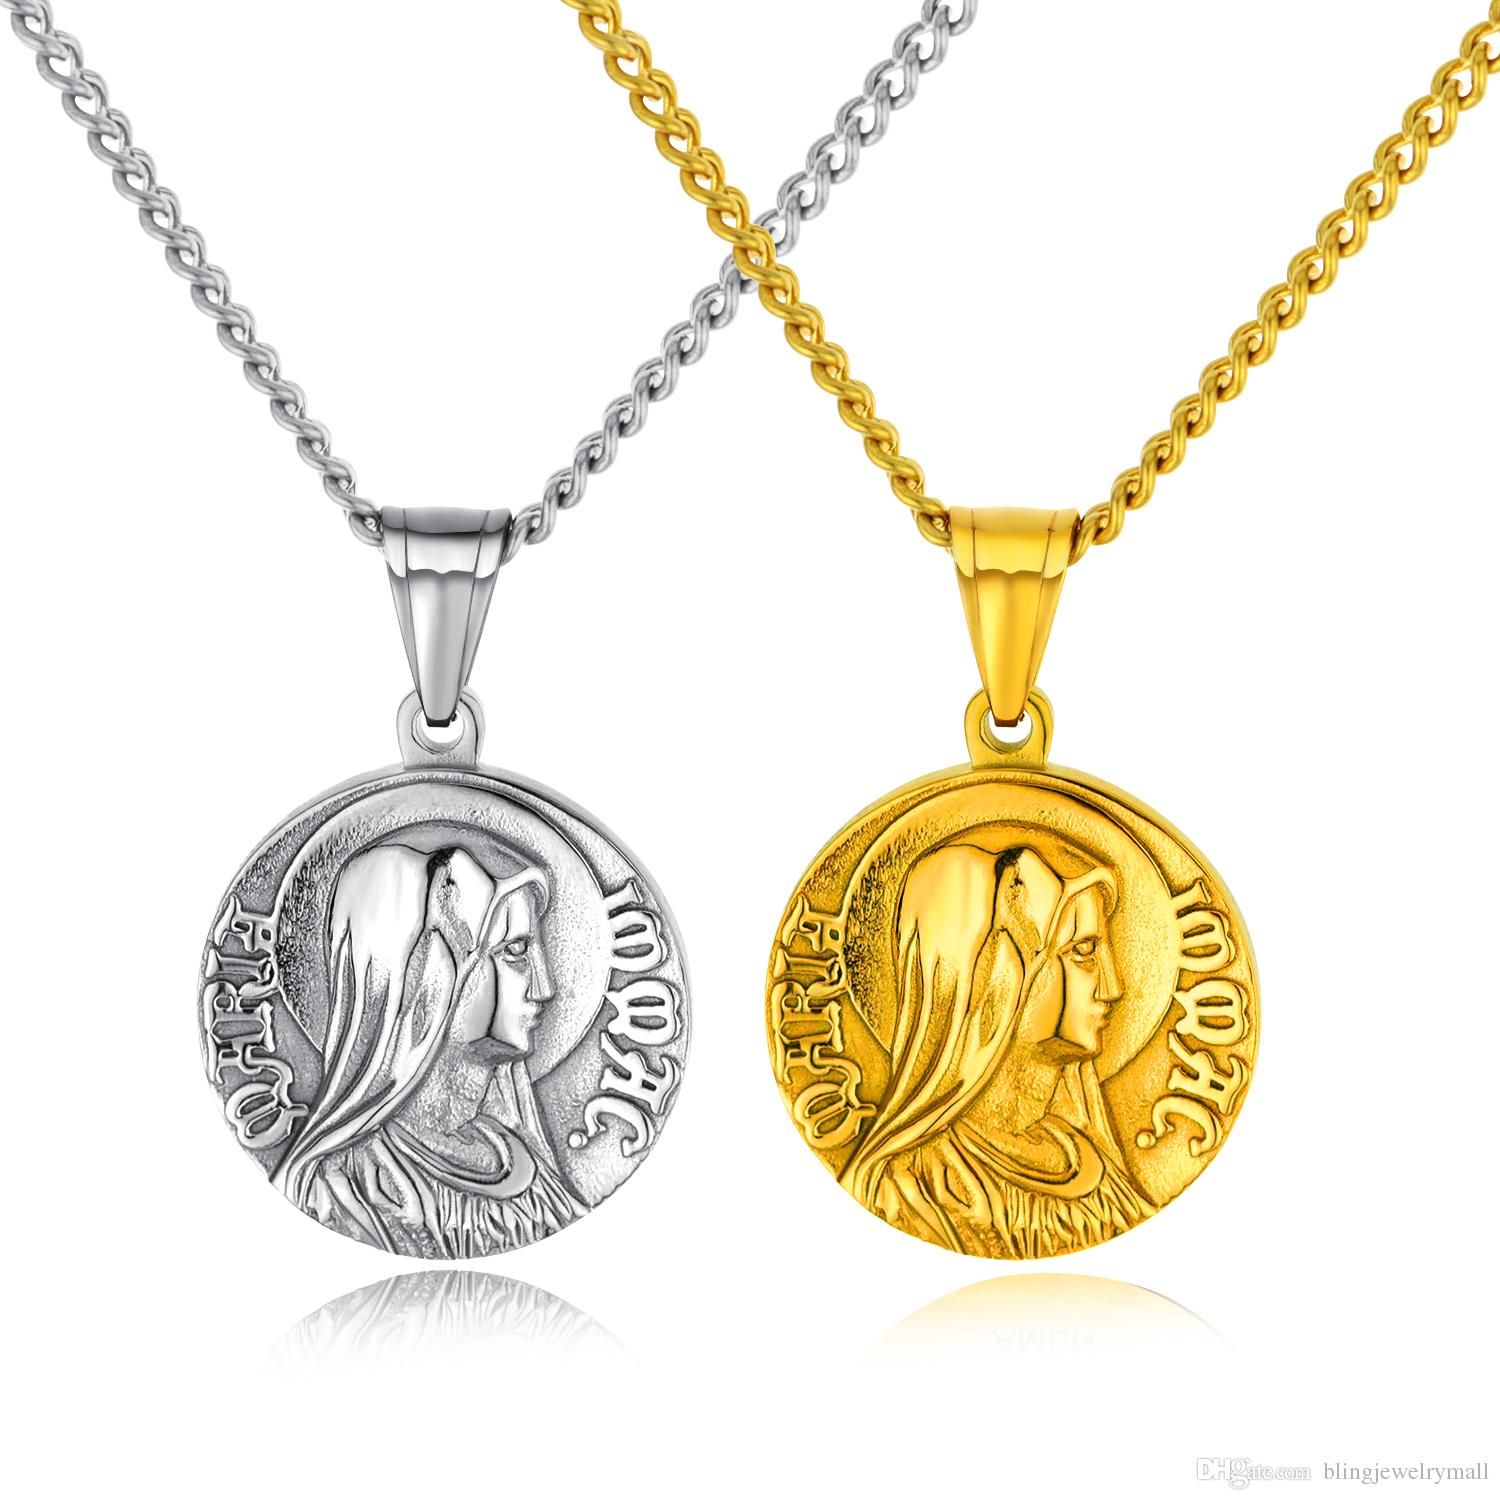 

Blessed Virgin Mary Pendant Necklace For Men Steel/Gold Bible Charm Religion Chain Necklace Female Catholicism Jewelry GX1403